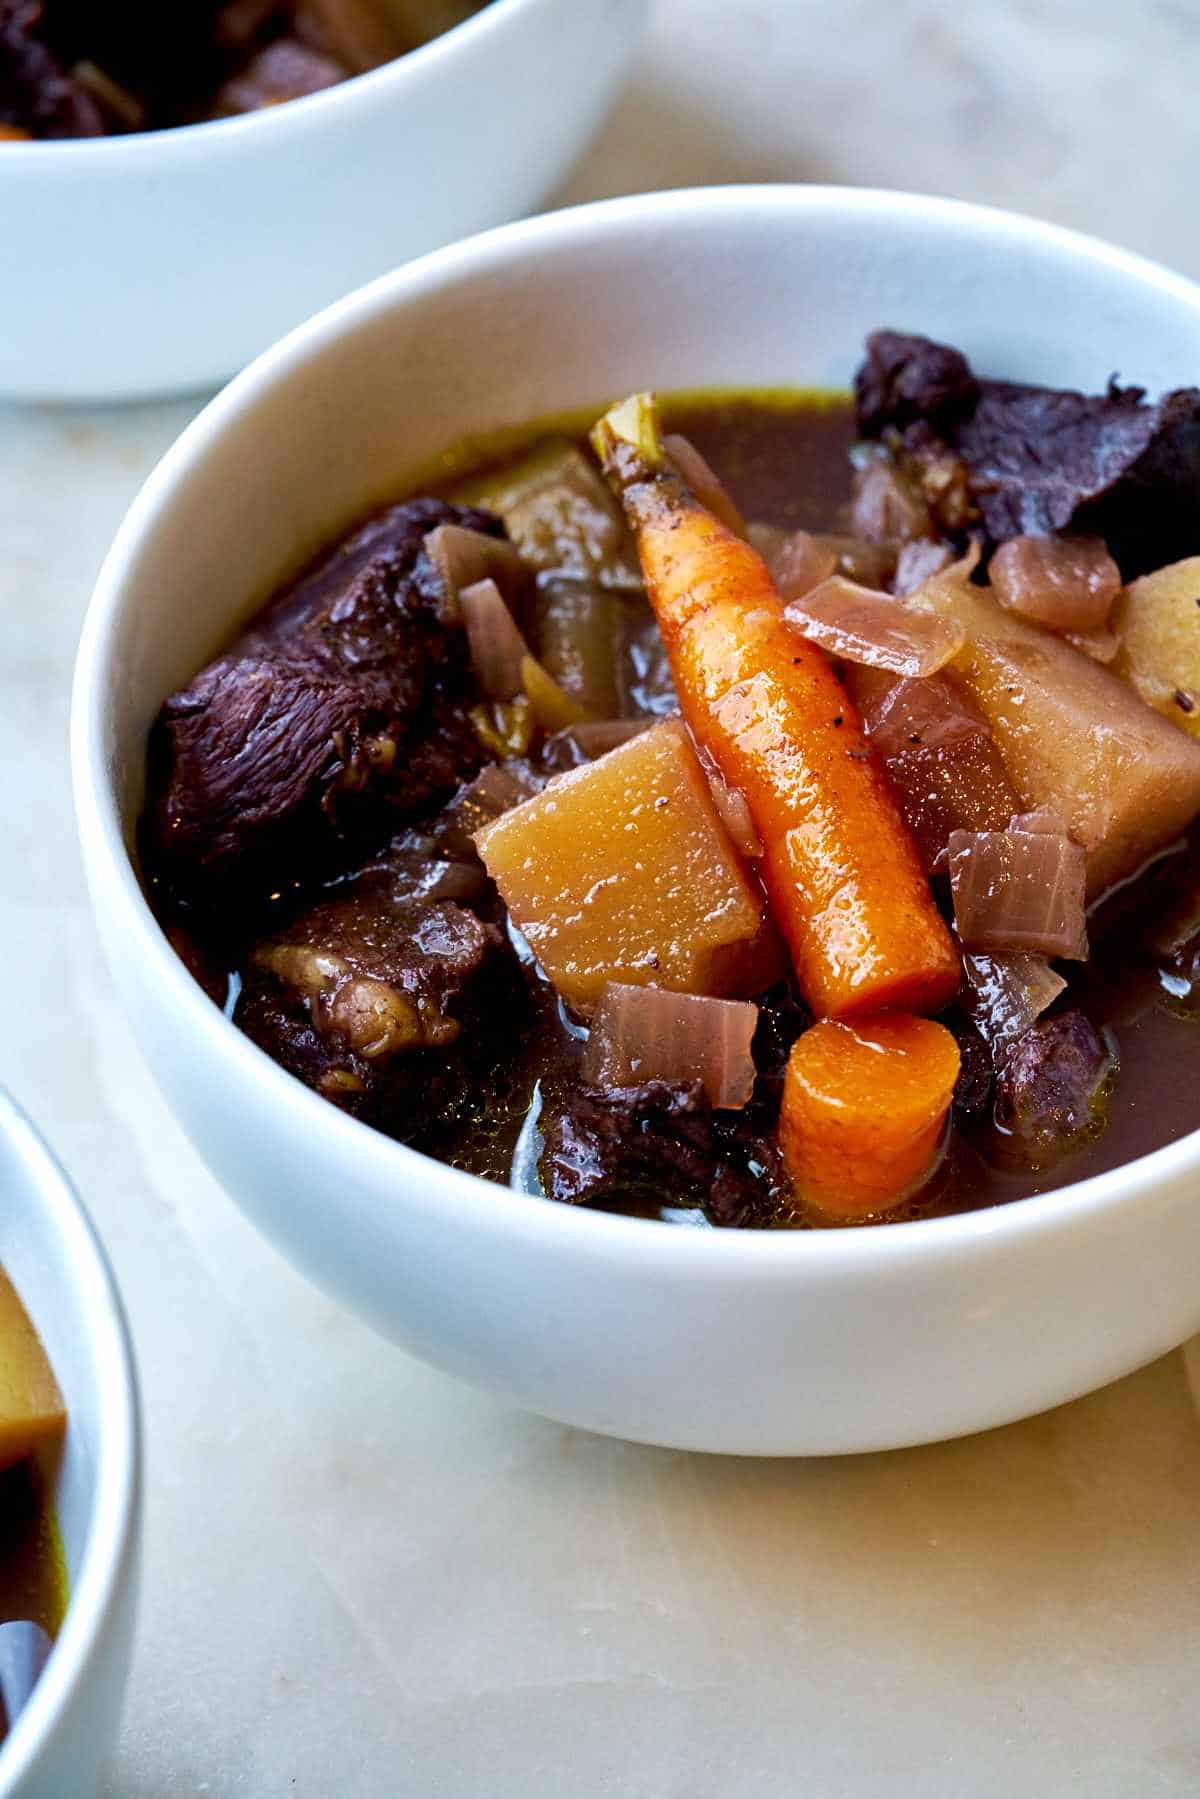 Bowl of beef stew.